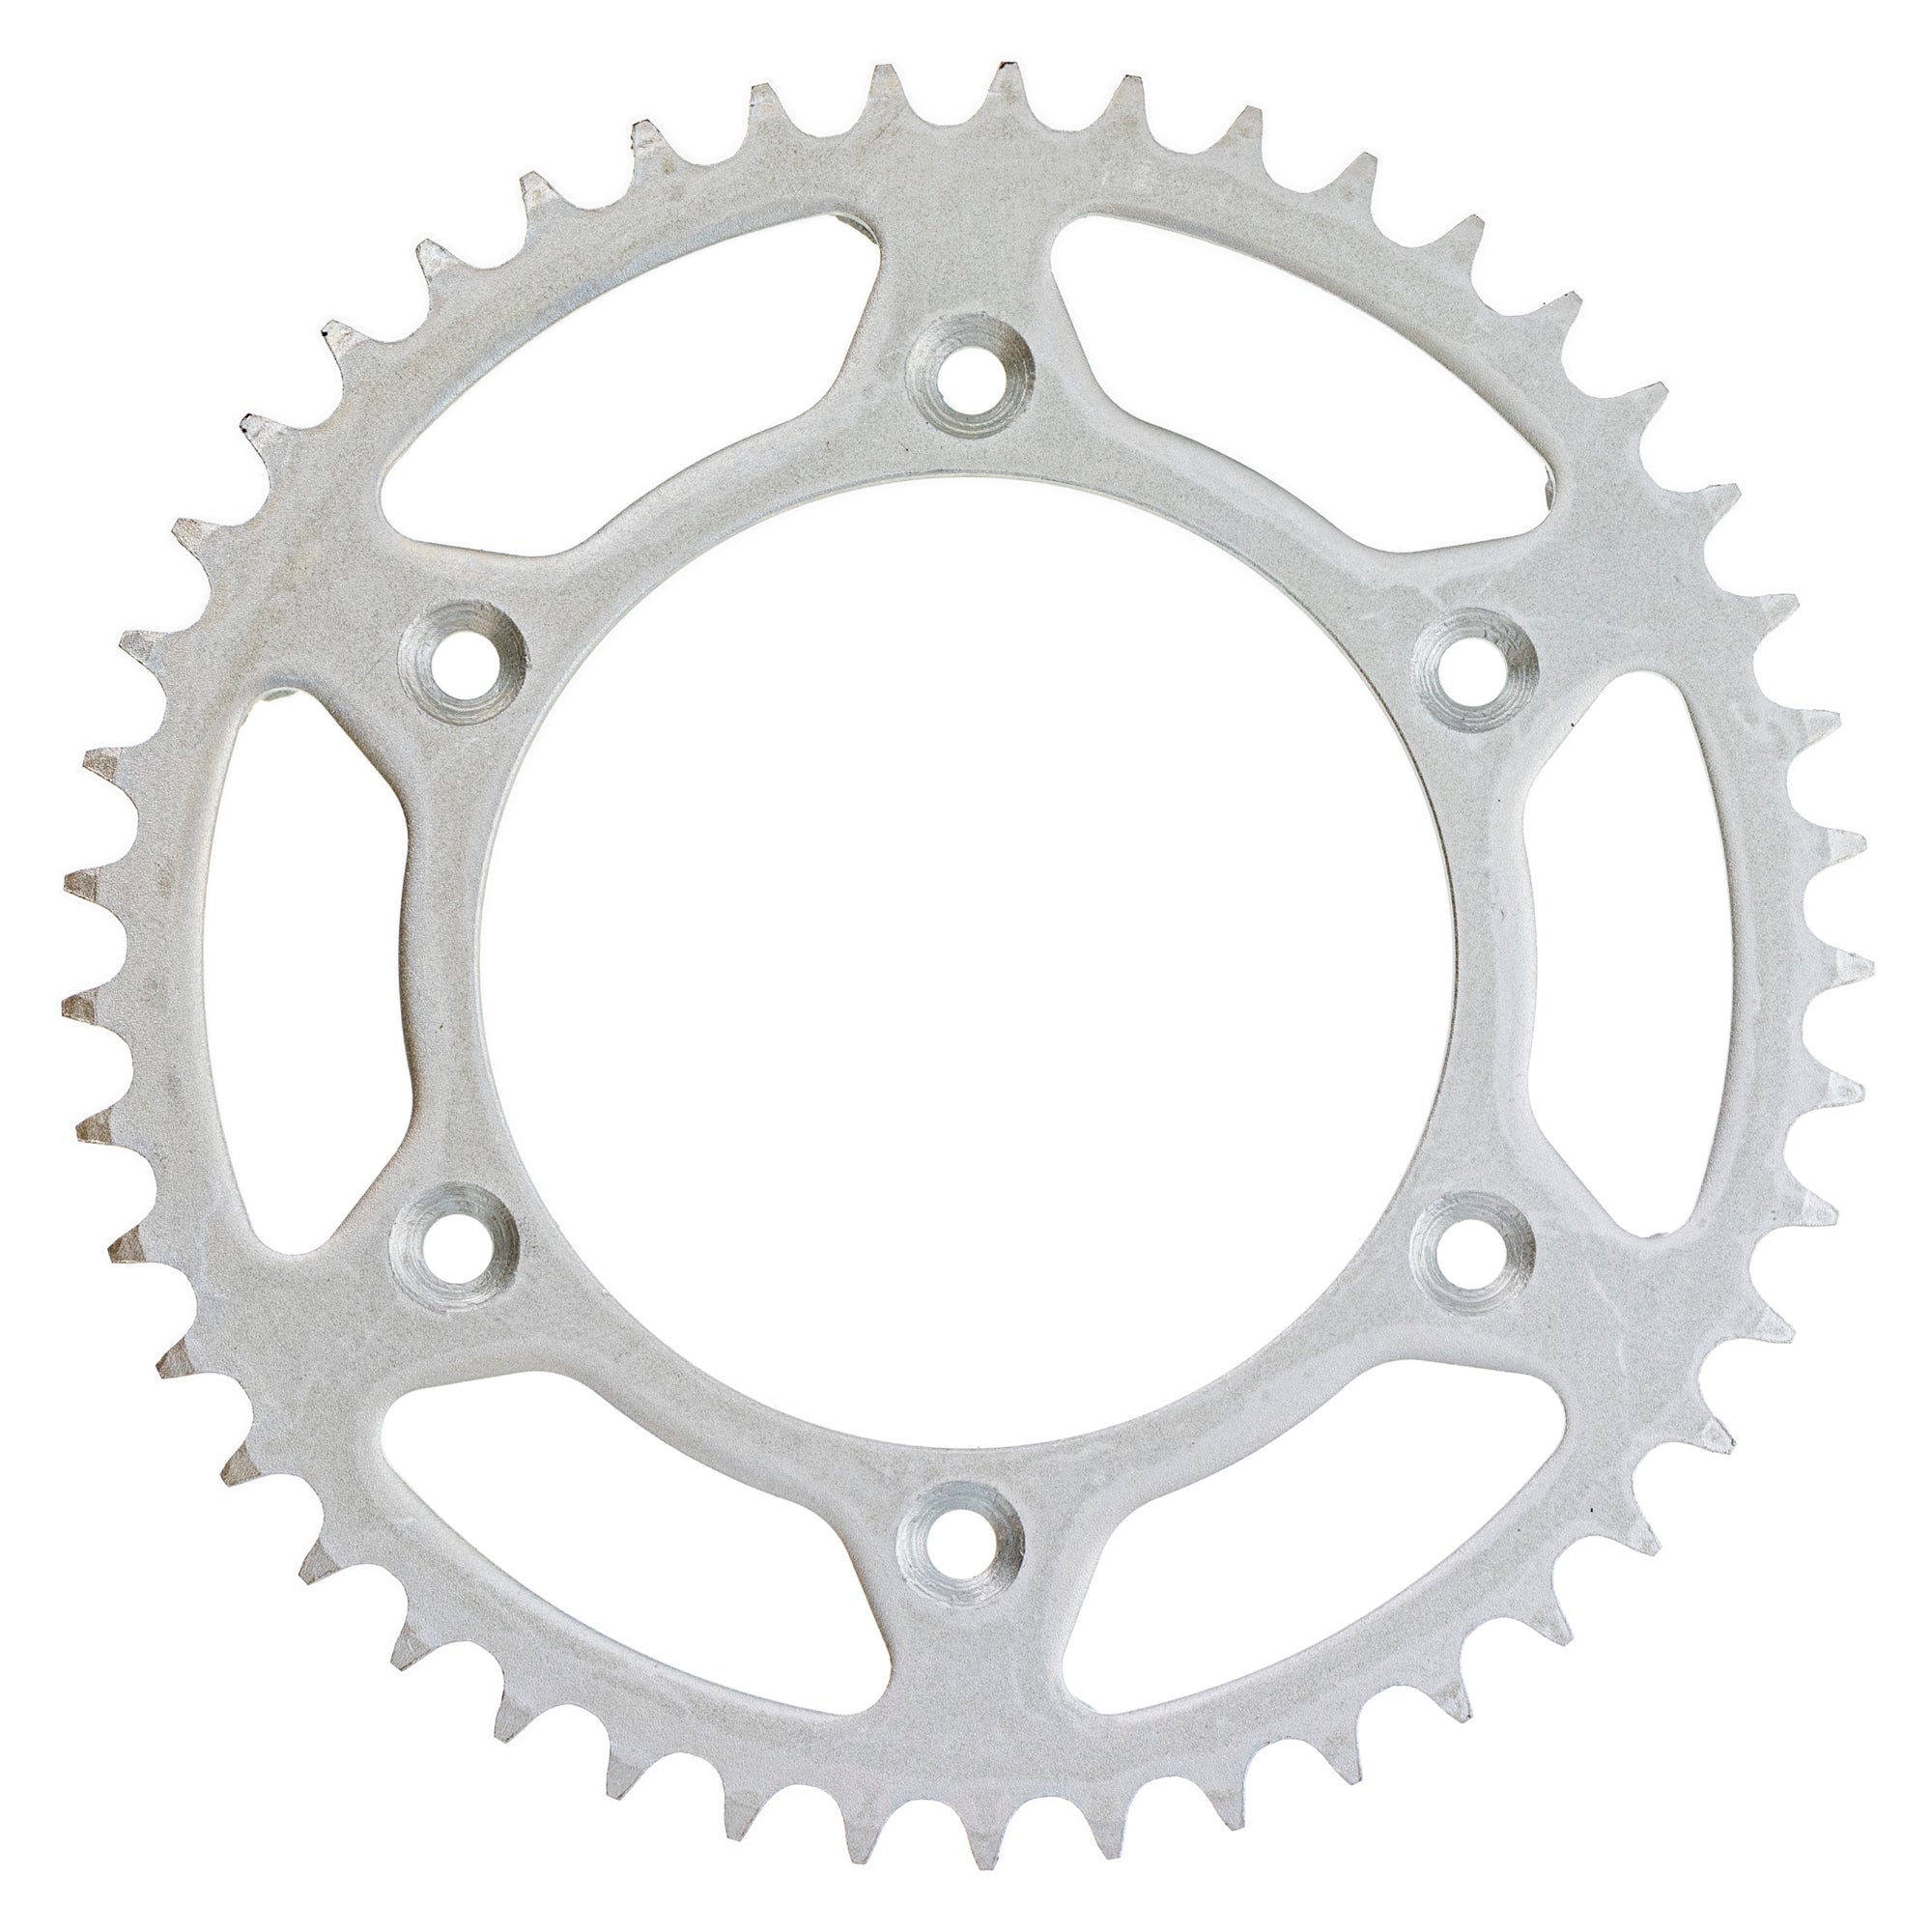 520 Pitch Front 14T Rear 45T Drive Sprocket Kit for KTM 350 400 640